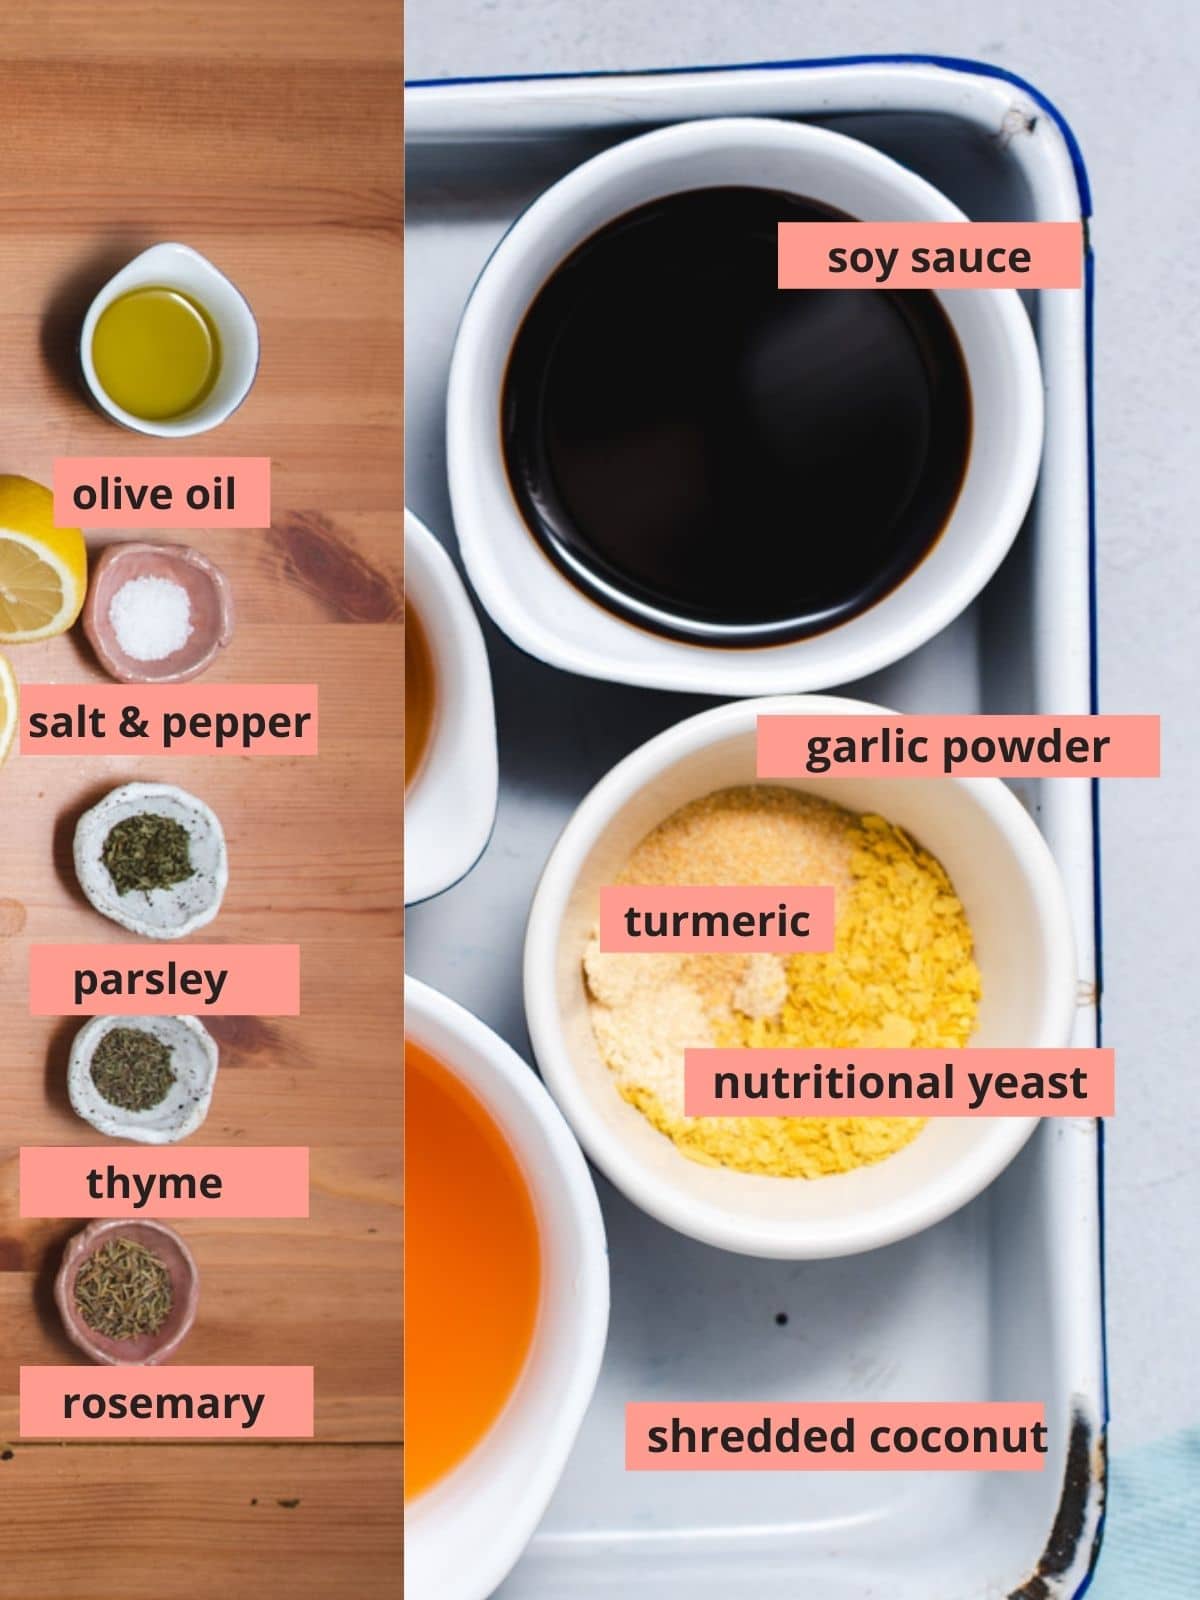 Labeled ingredients used to make a tofu scramble.